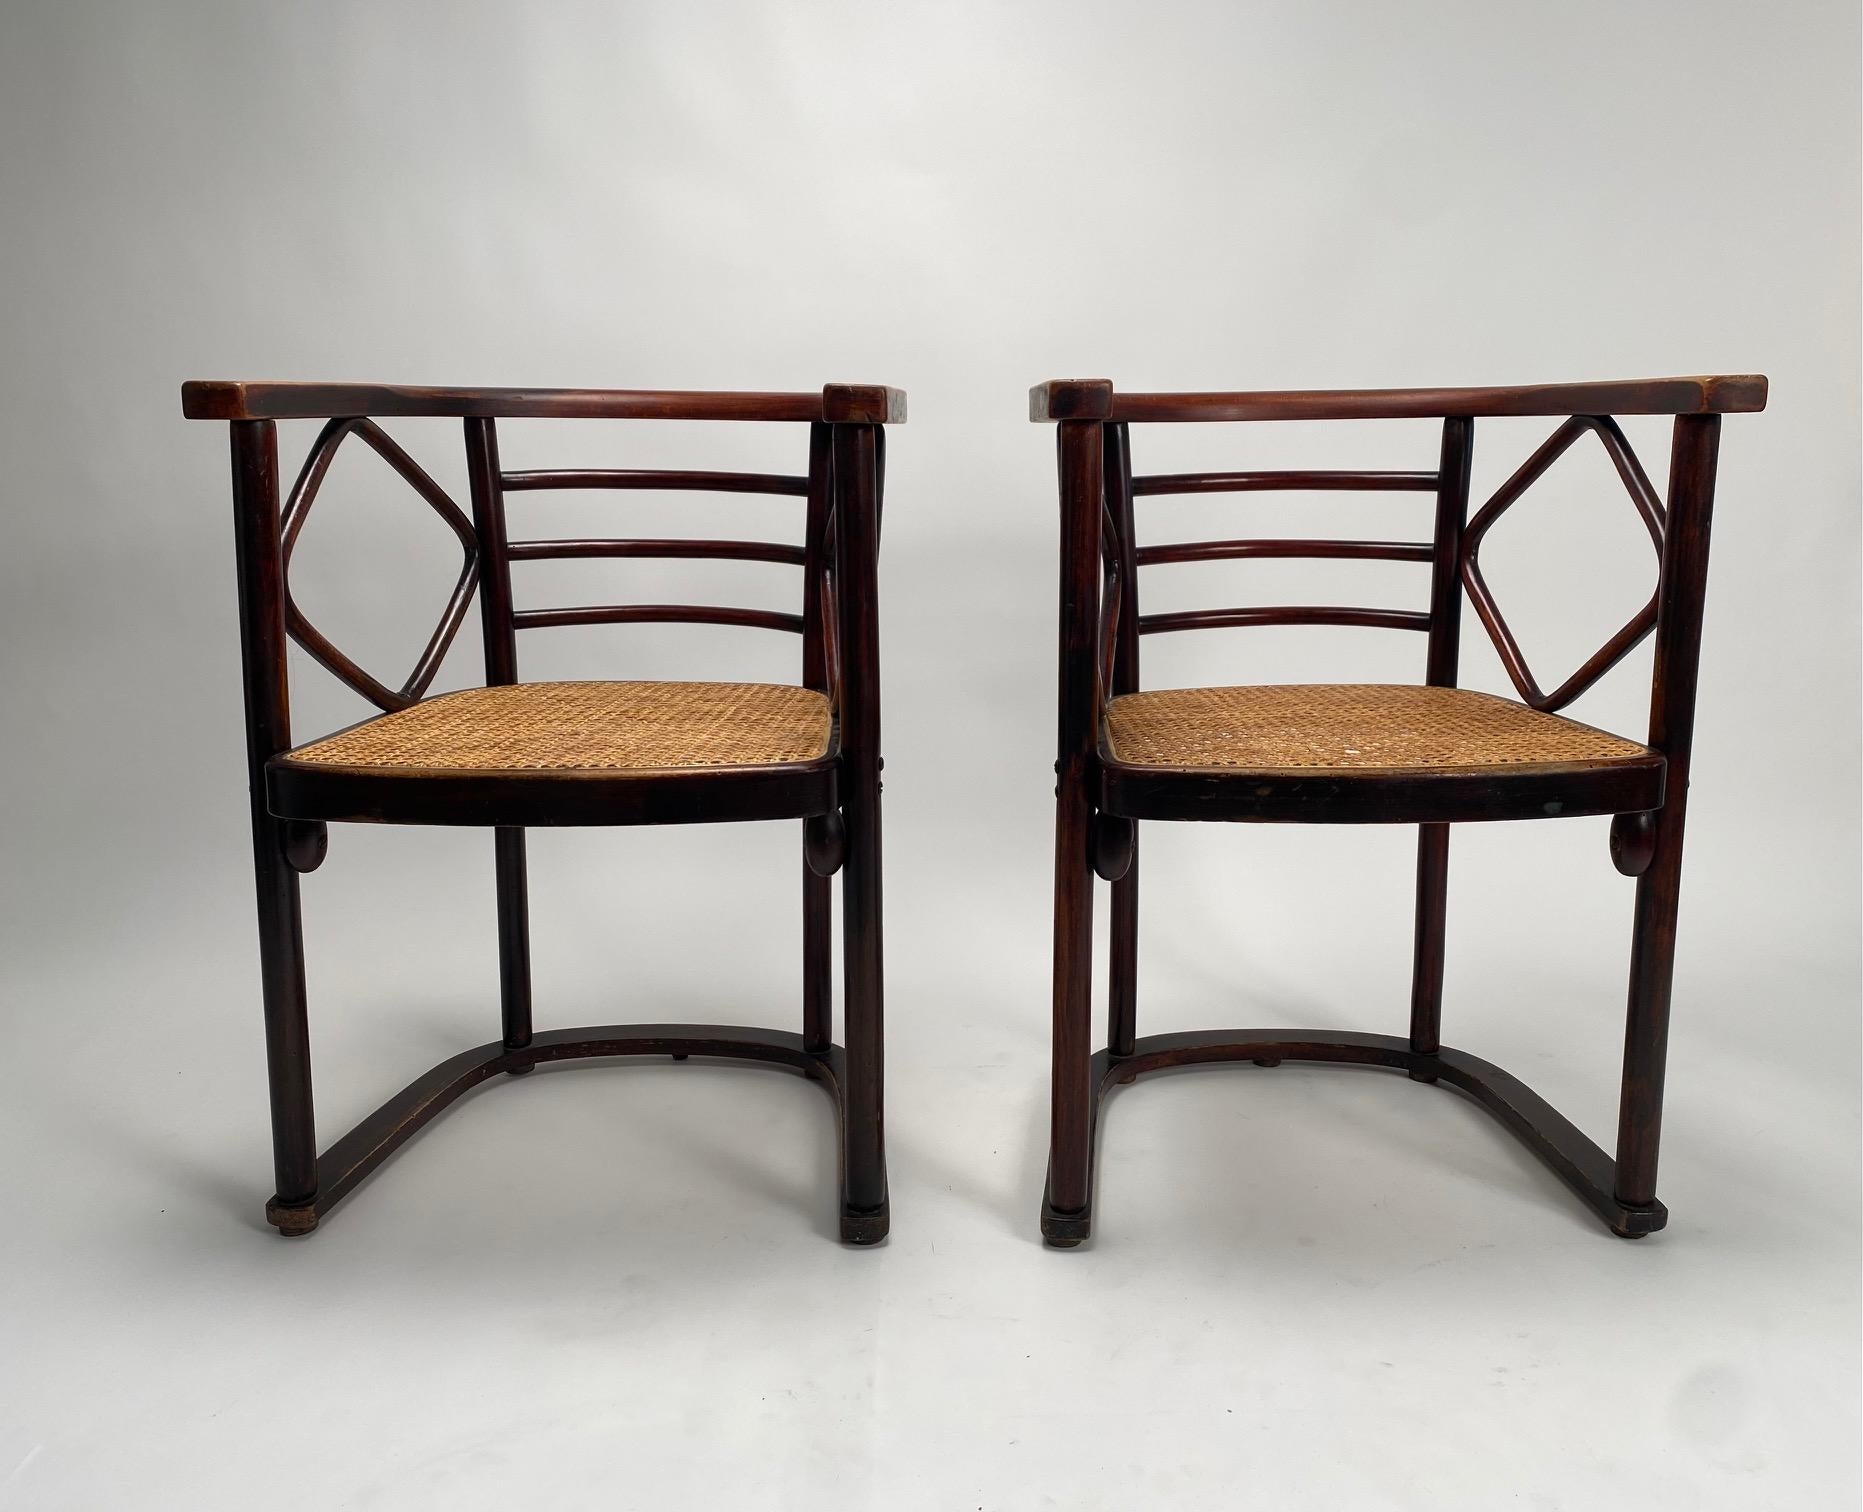 Pair of bentwood Armchairs mod. Fledermaus by Josef Hoffmann for Thonet, 1910s

It is one of the most famous creations of the Austrian architect Josef Hoffmann, one of the founding fathers of the Viennese Secession. built in the early 1900s, they